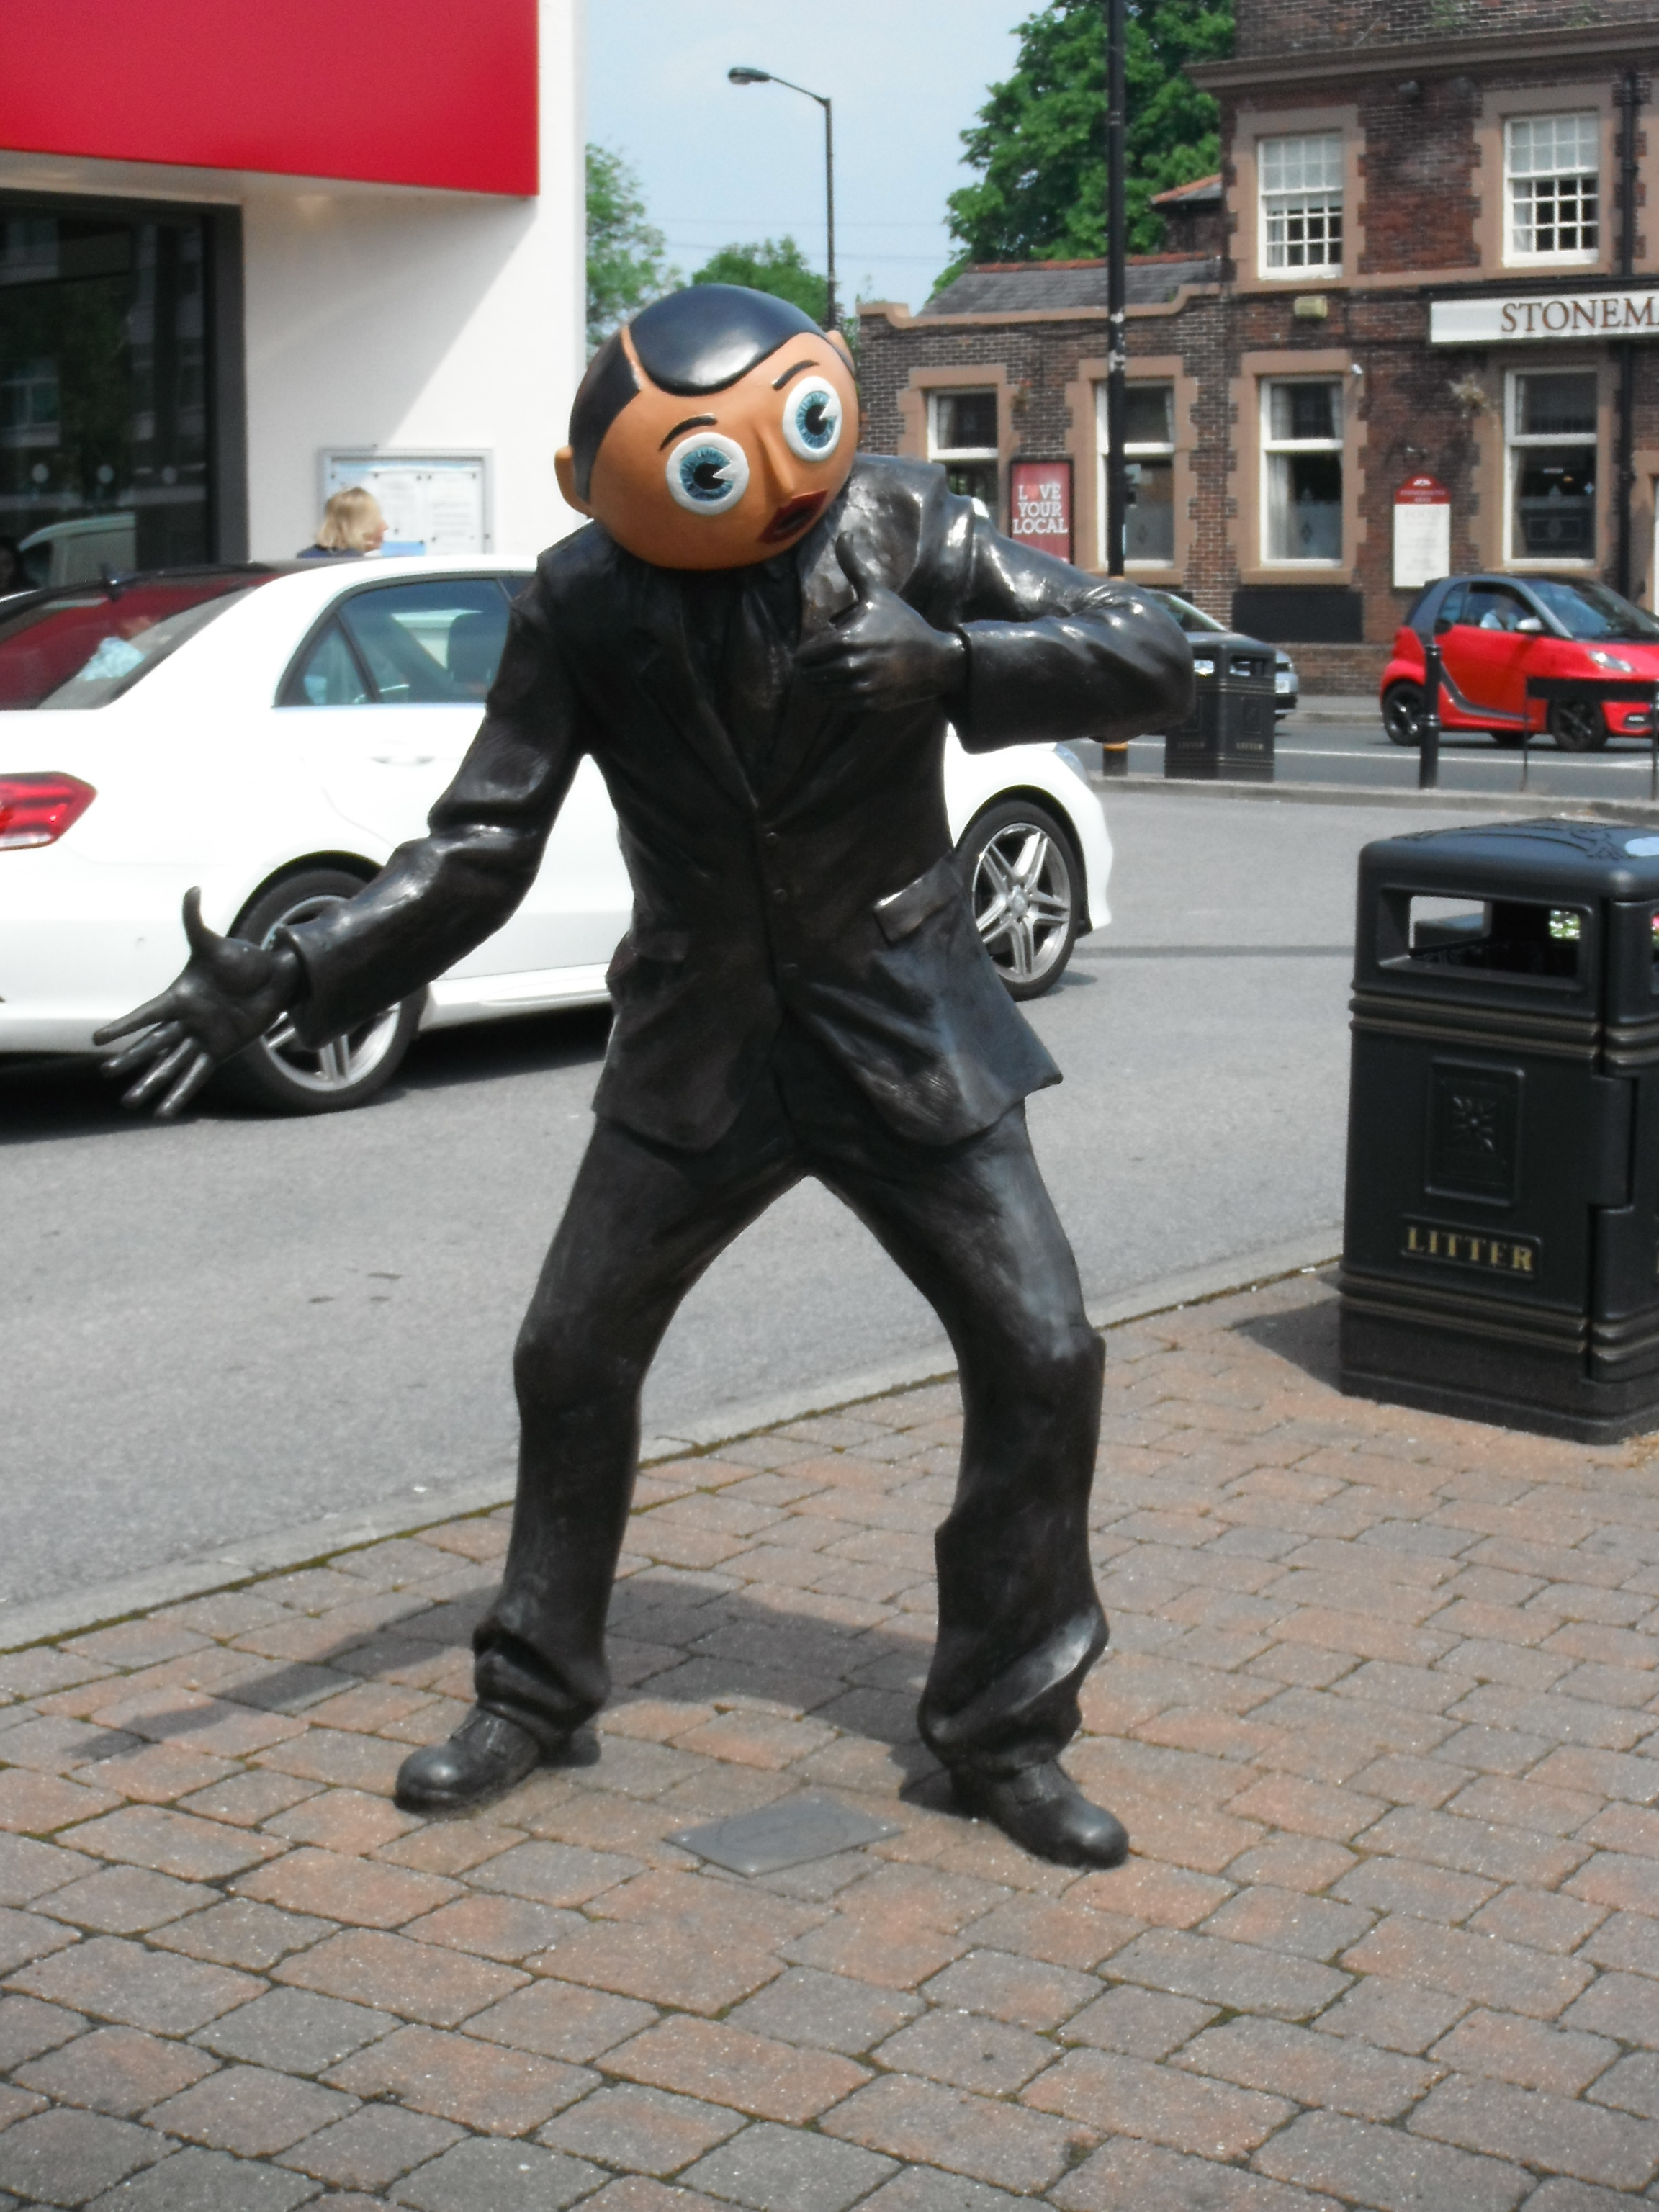 photo taken by me - Frank Sidebottom in Timperley, Cheshire